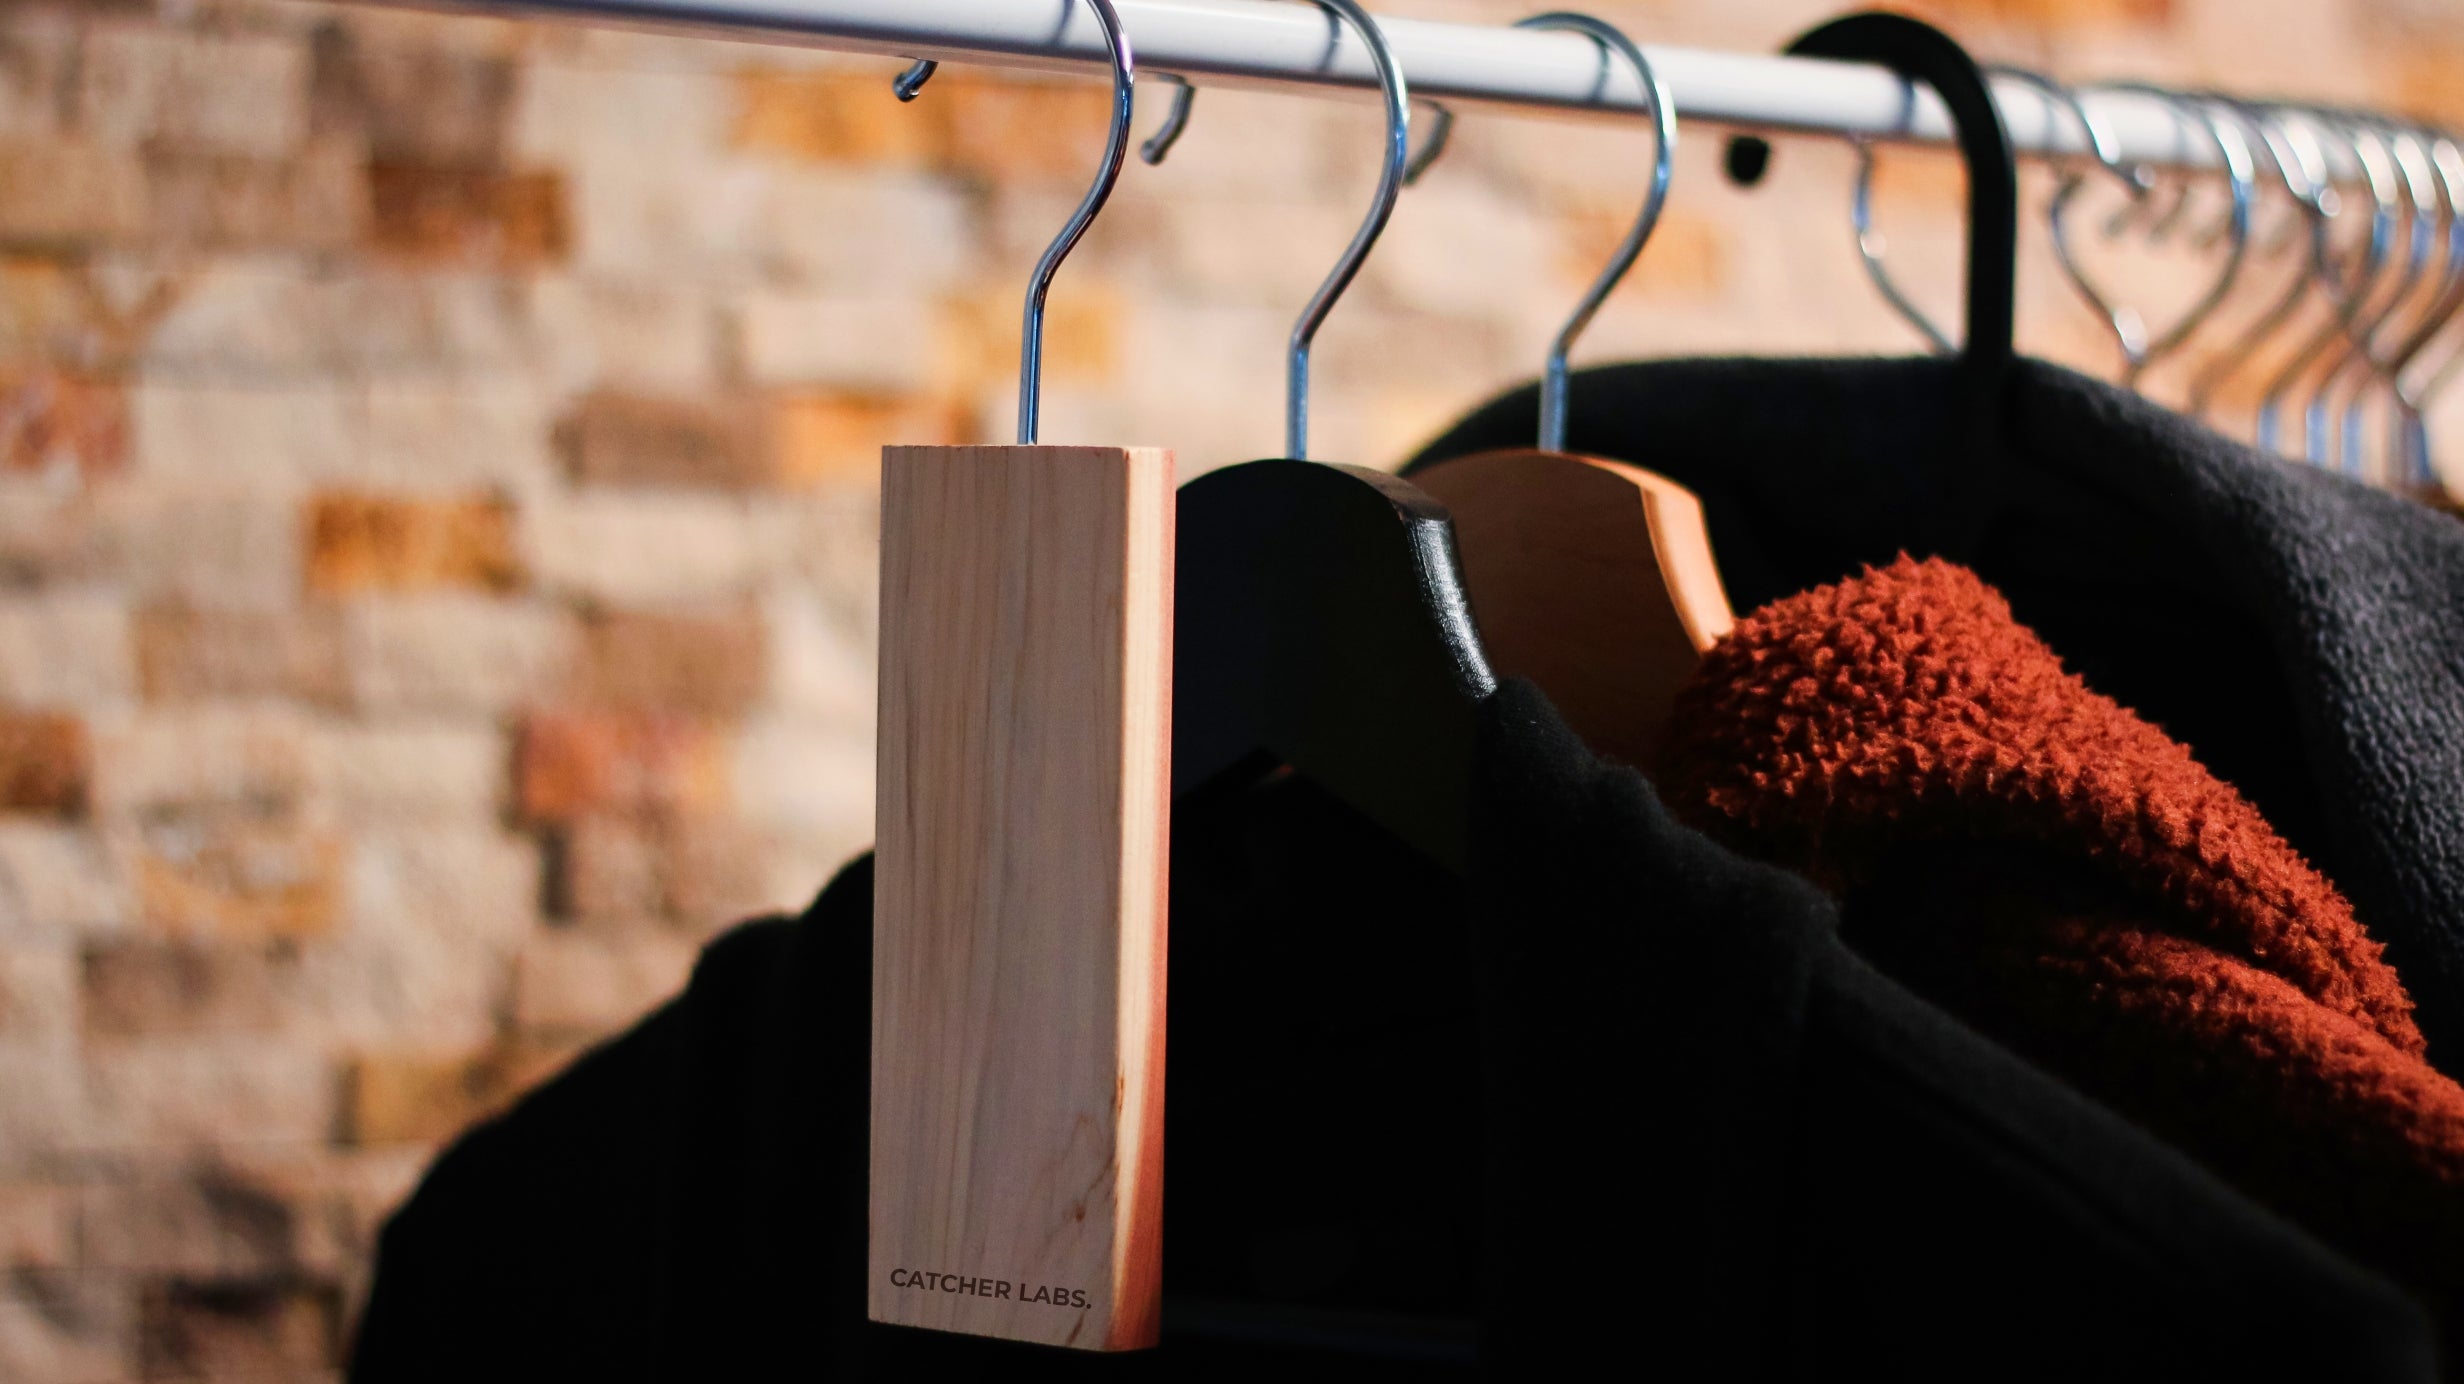 Shield Your Finest Clothes with Cedar Planks - Stop Moth Invasion and Holes on Your Clothing Items